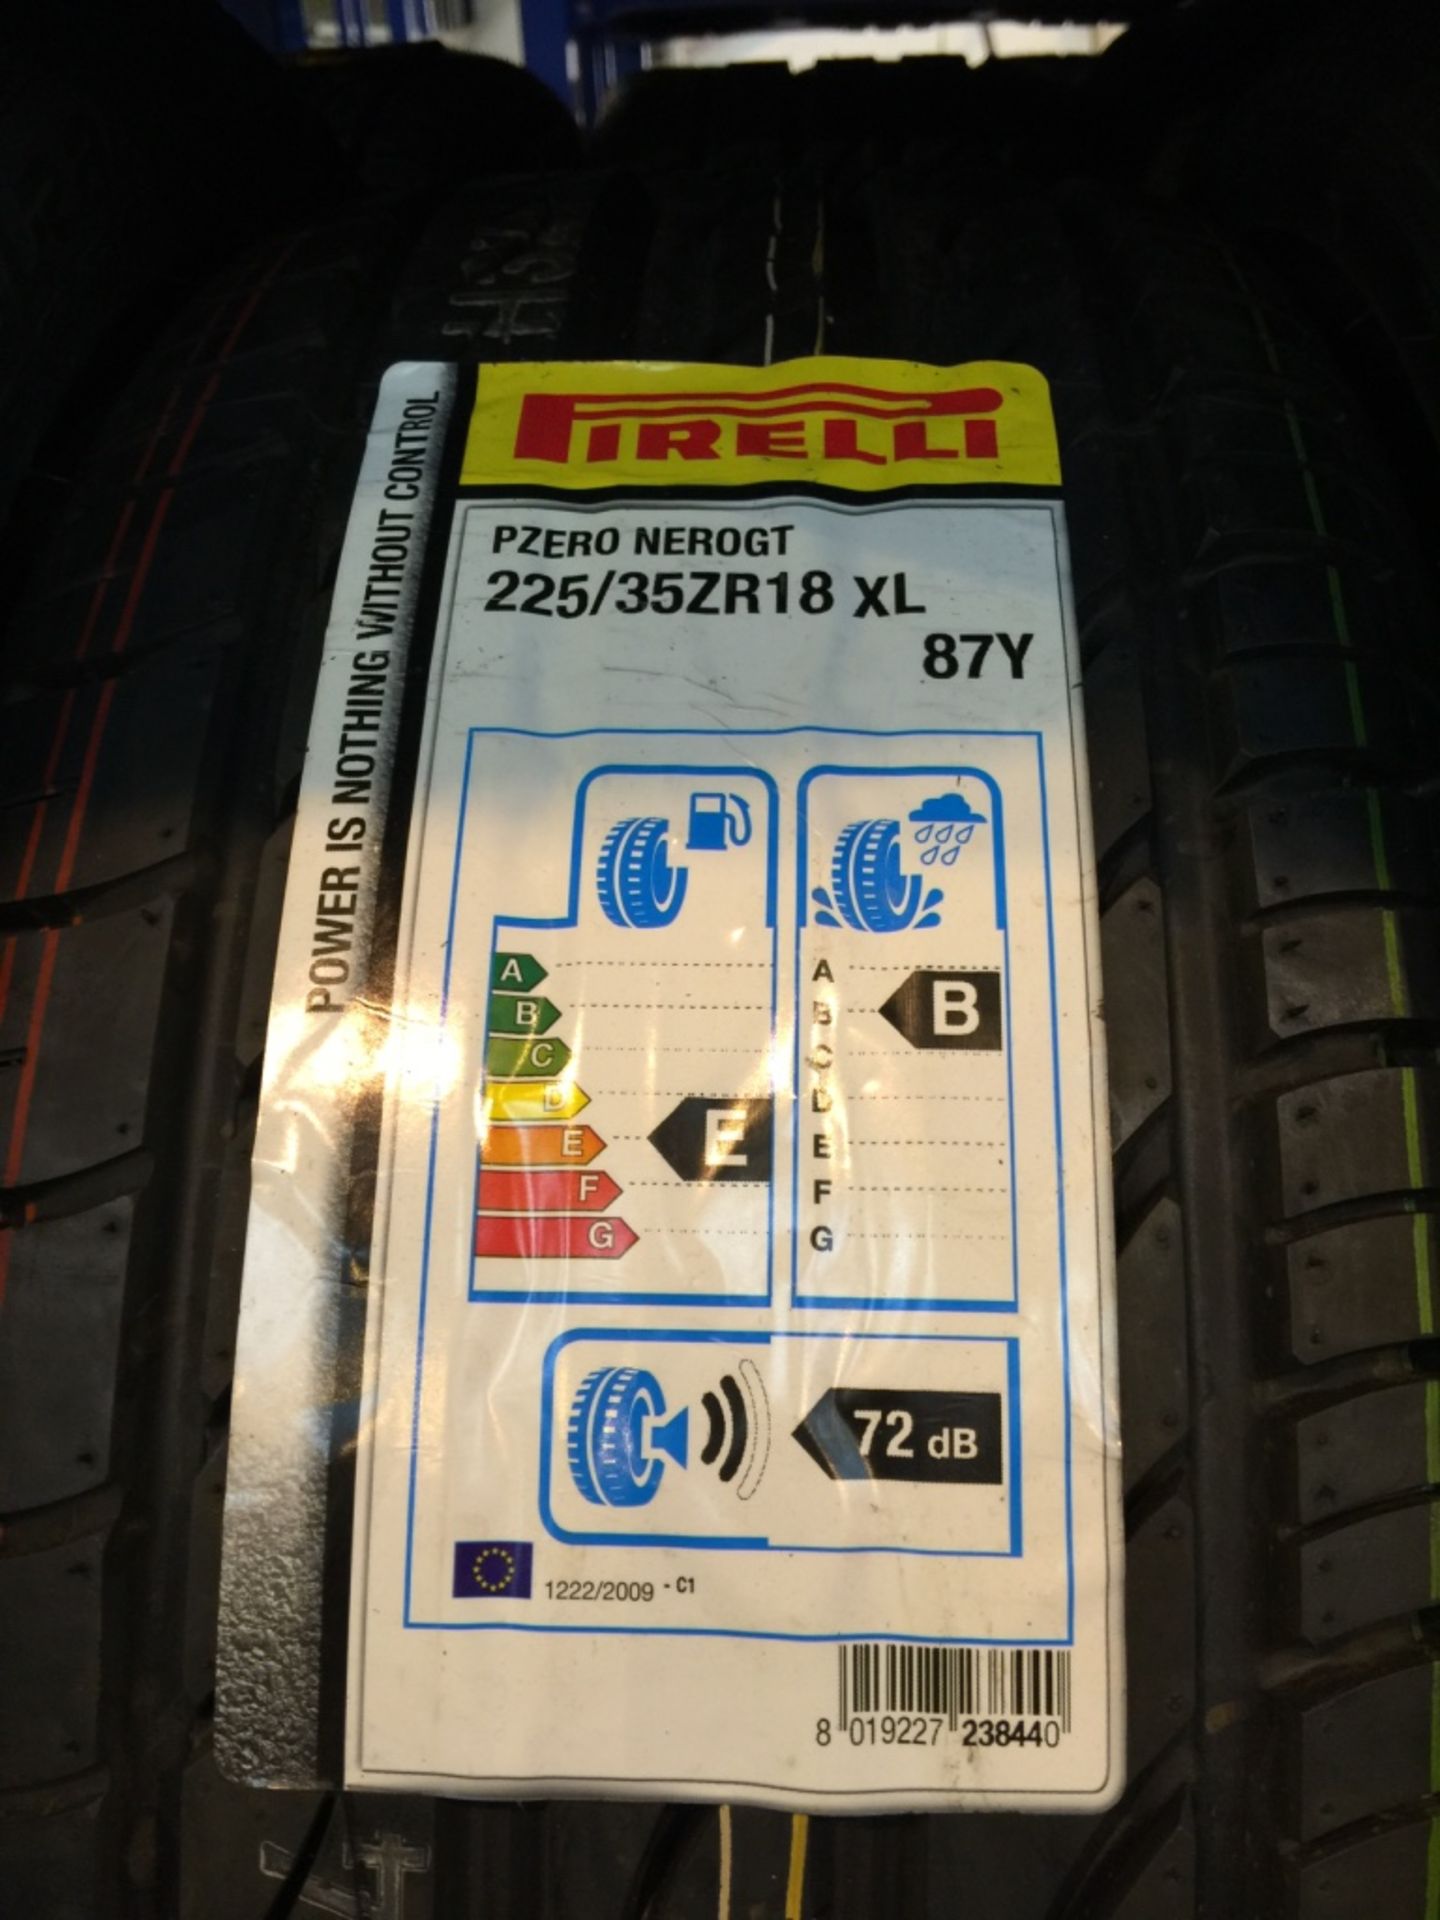 54: Pirelli Tyres Car & 4X4 - Many Large Sizes to include 18,19,21" Please see further Pictures ( - Image 35 of 55